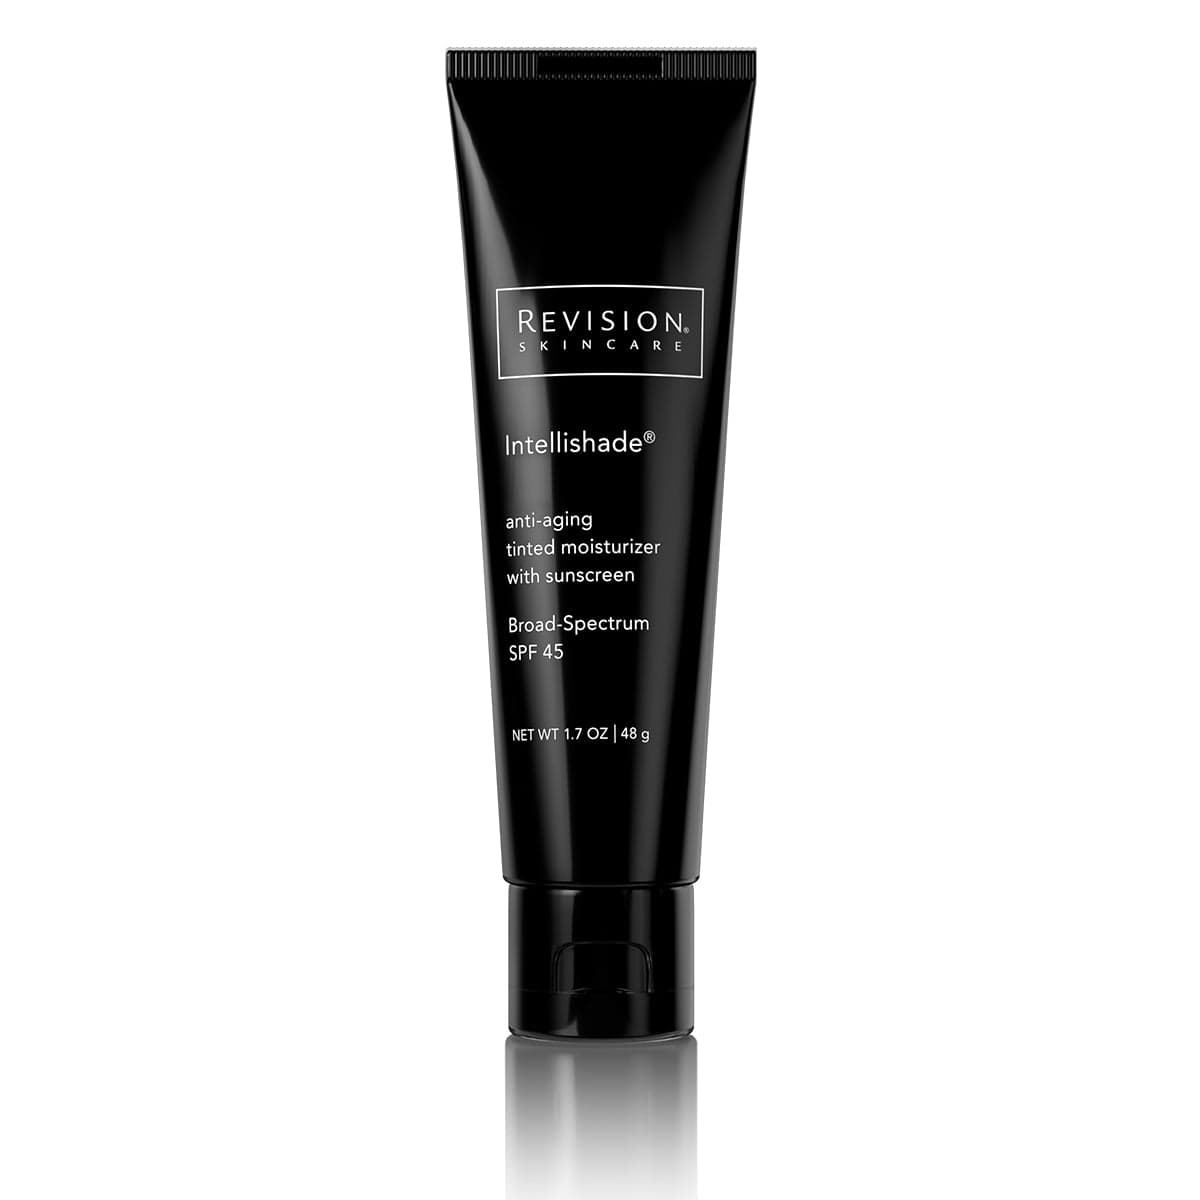 The Revision Ritual Full Size Regimen Collection- Intellishade